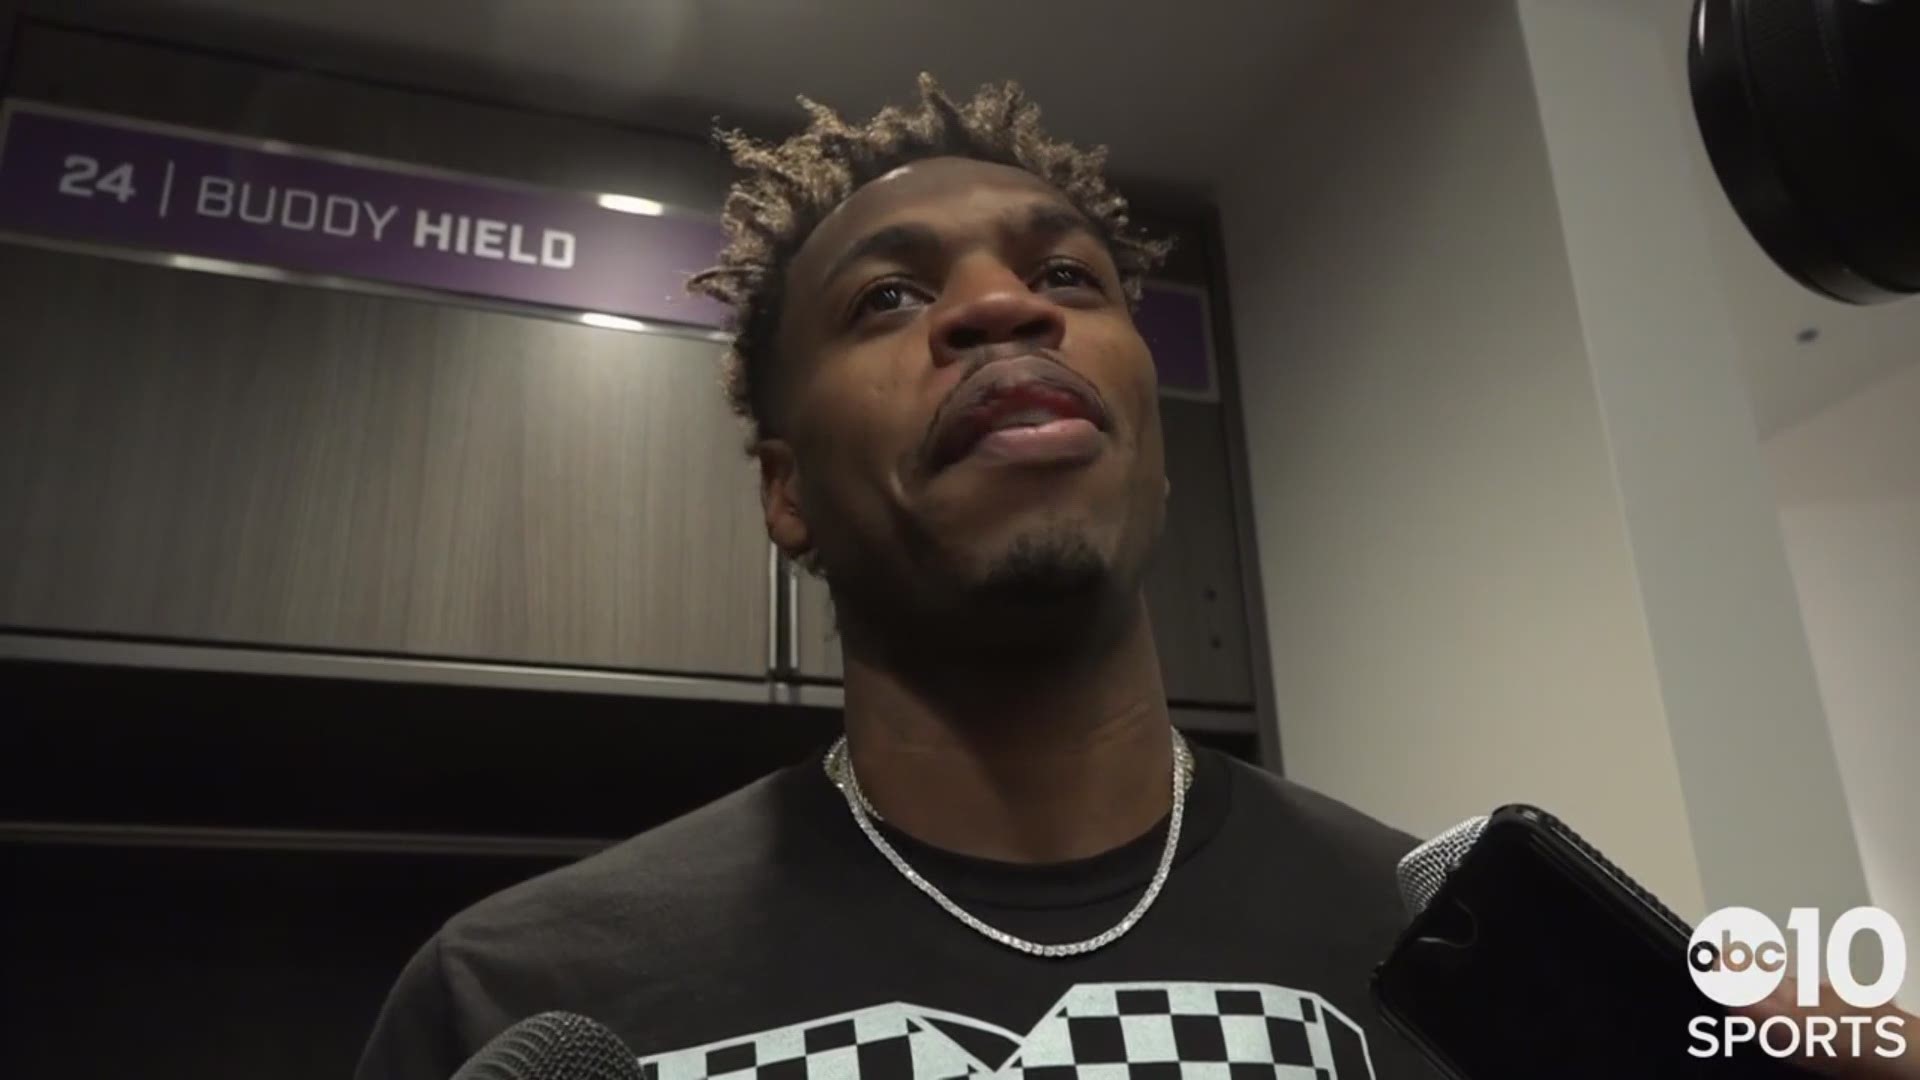 Sacramento Kings SG Buddy Hield talks about Sunday afternoon's 100-99 win over the Celtics and his sean scoring high 35 point performance.